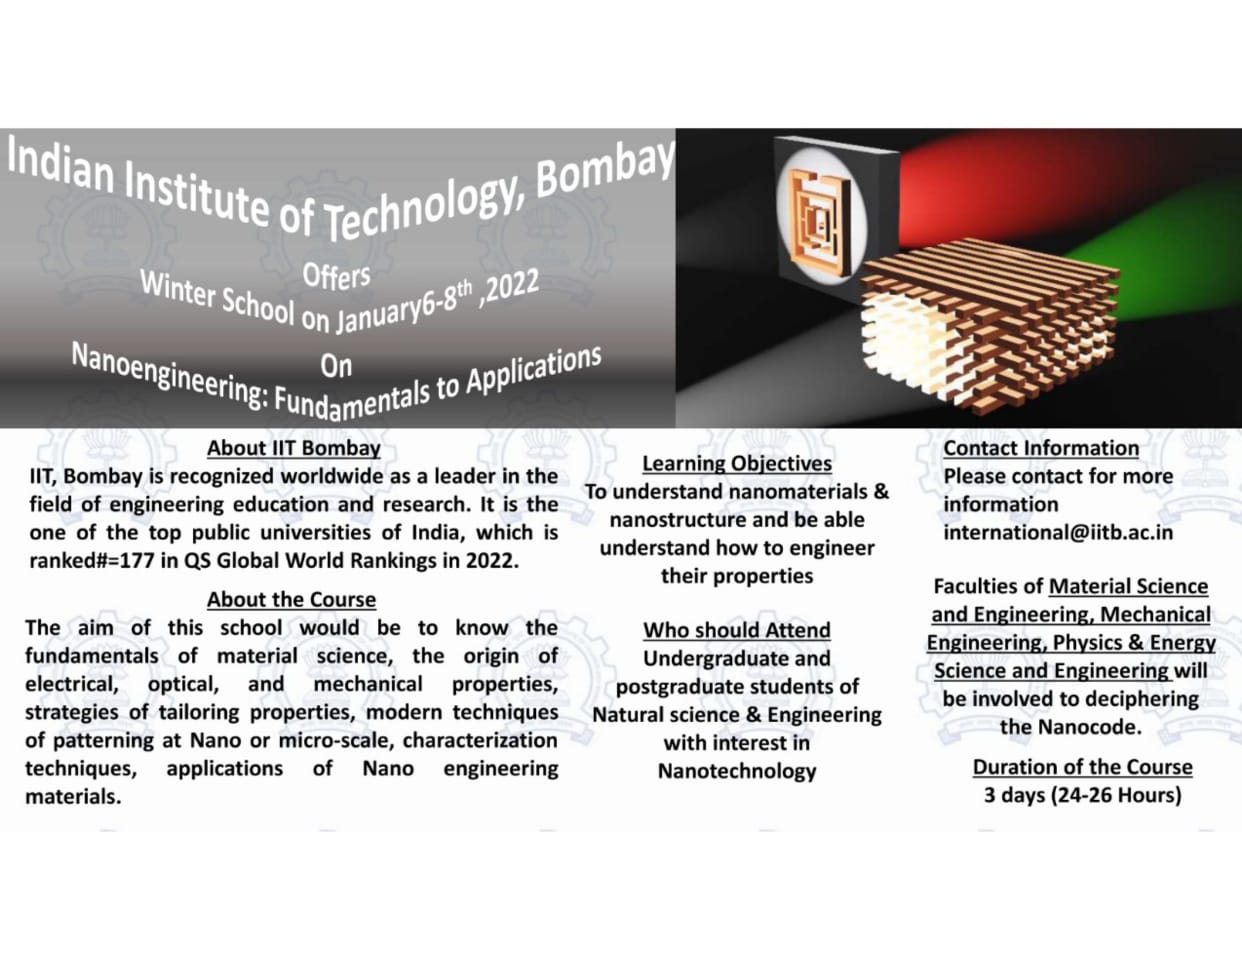 [Call for Application] Winter School Programme Indian Institute of Technology, Bombay